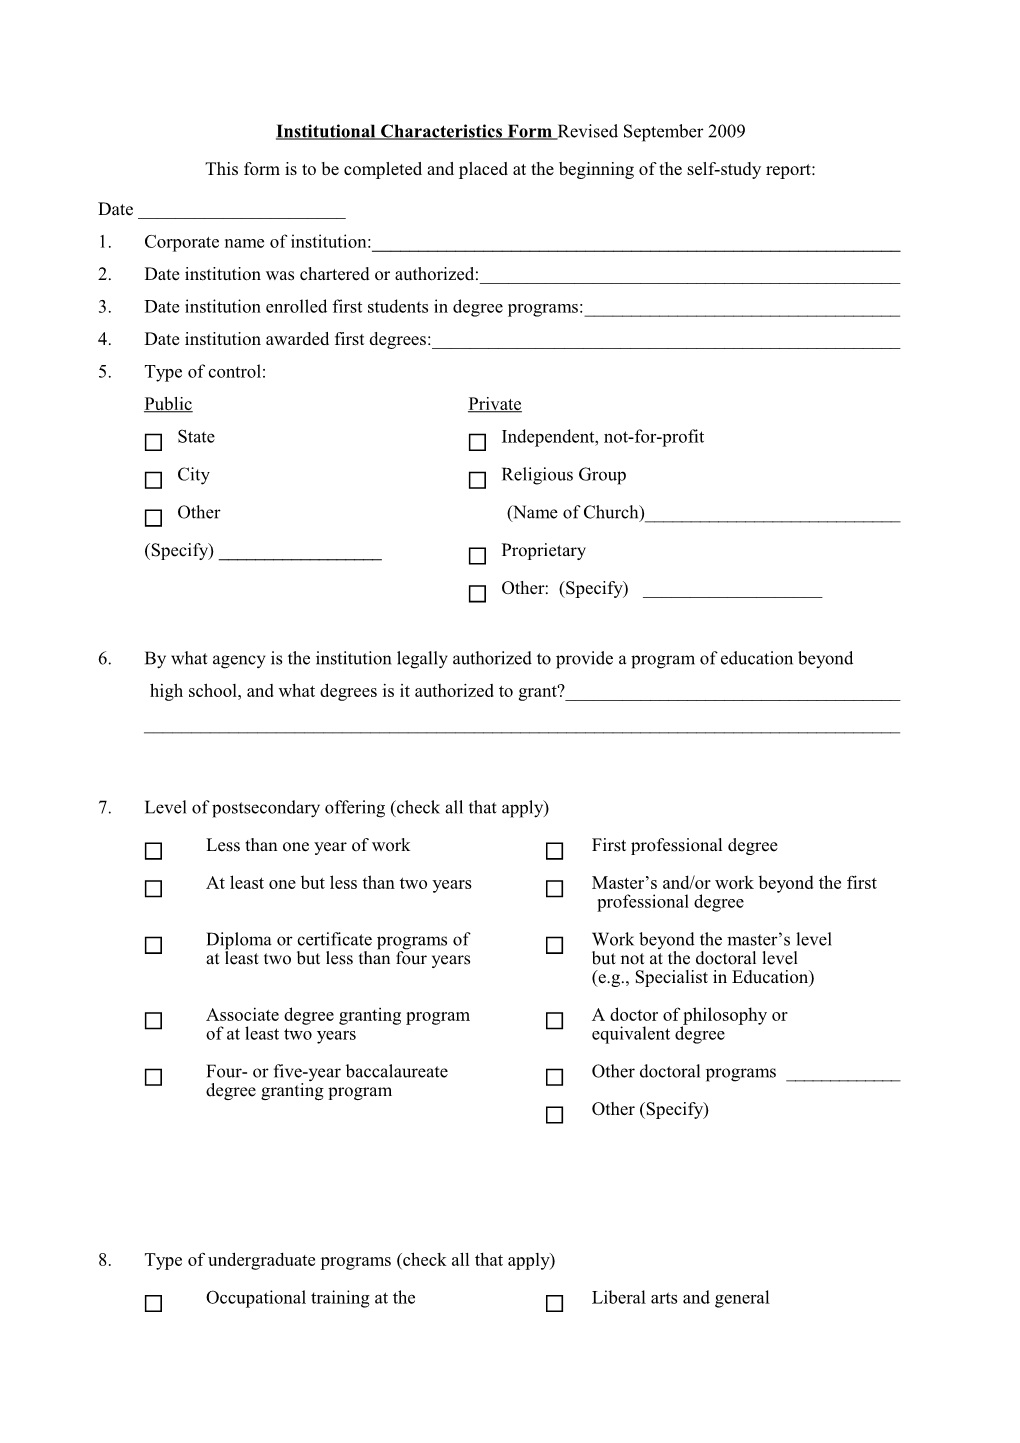 This Form Is to Be Completed and Placed at the Beginning of the Self-Study Report